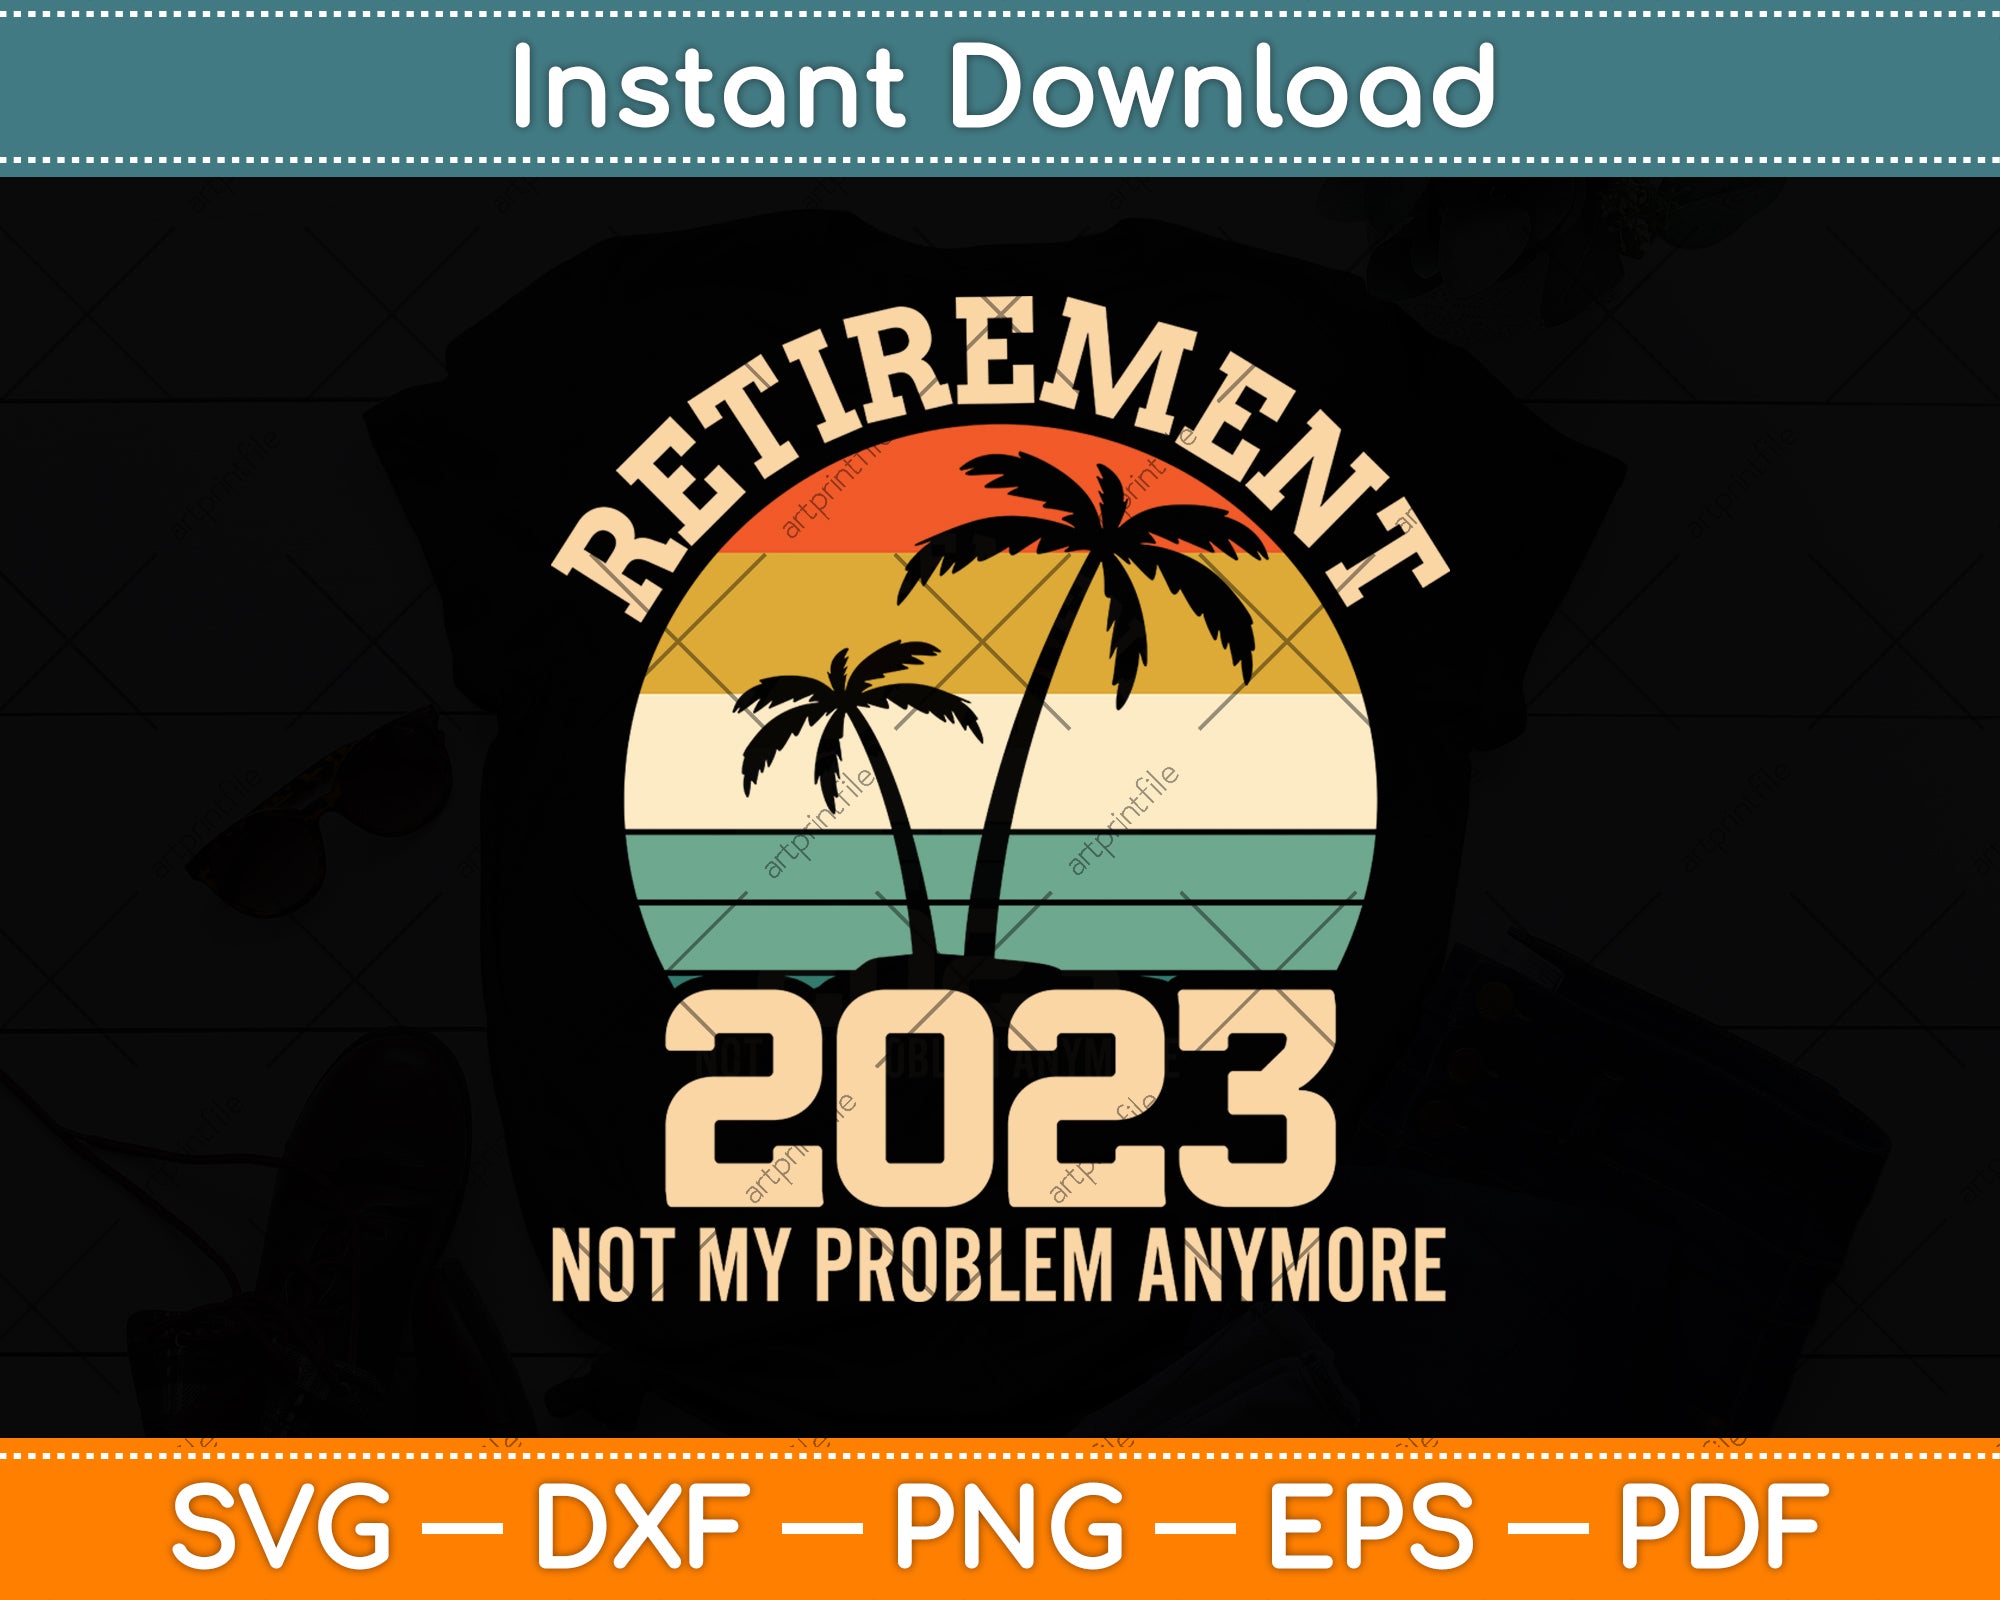 Officially retired, 2023 not my problem anymore, retirement quotes - free  svg file for members - SVG Heart